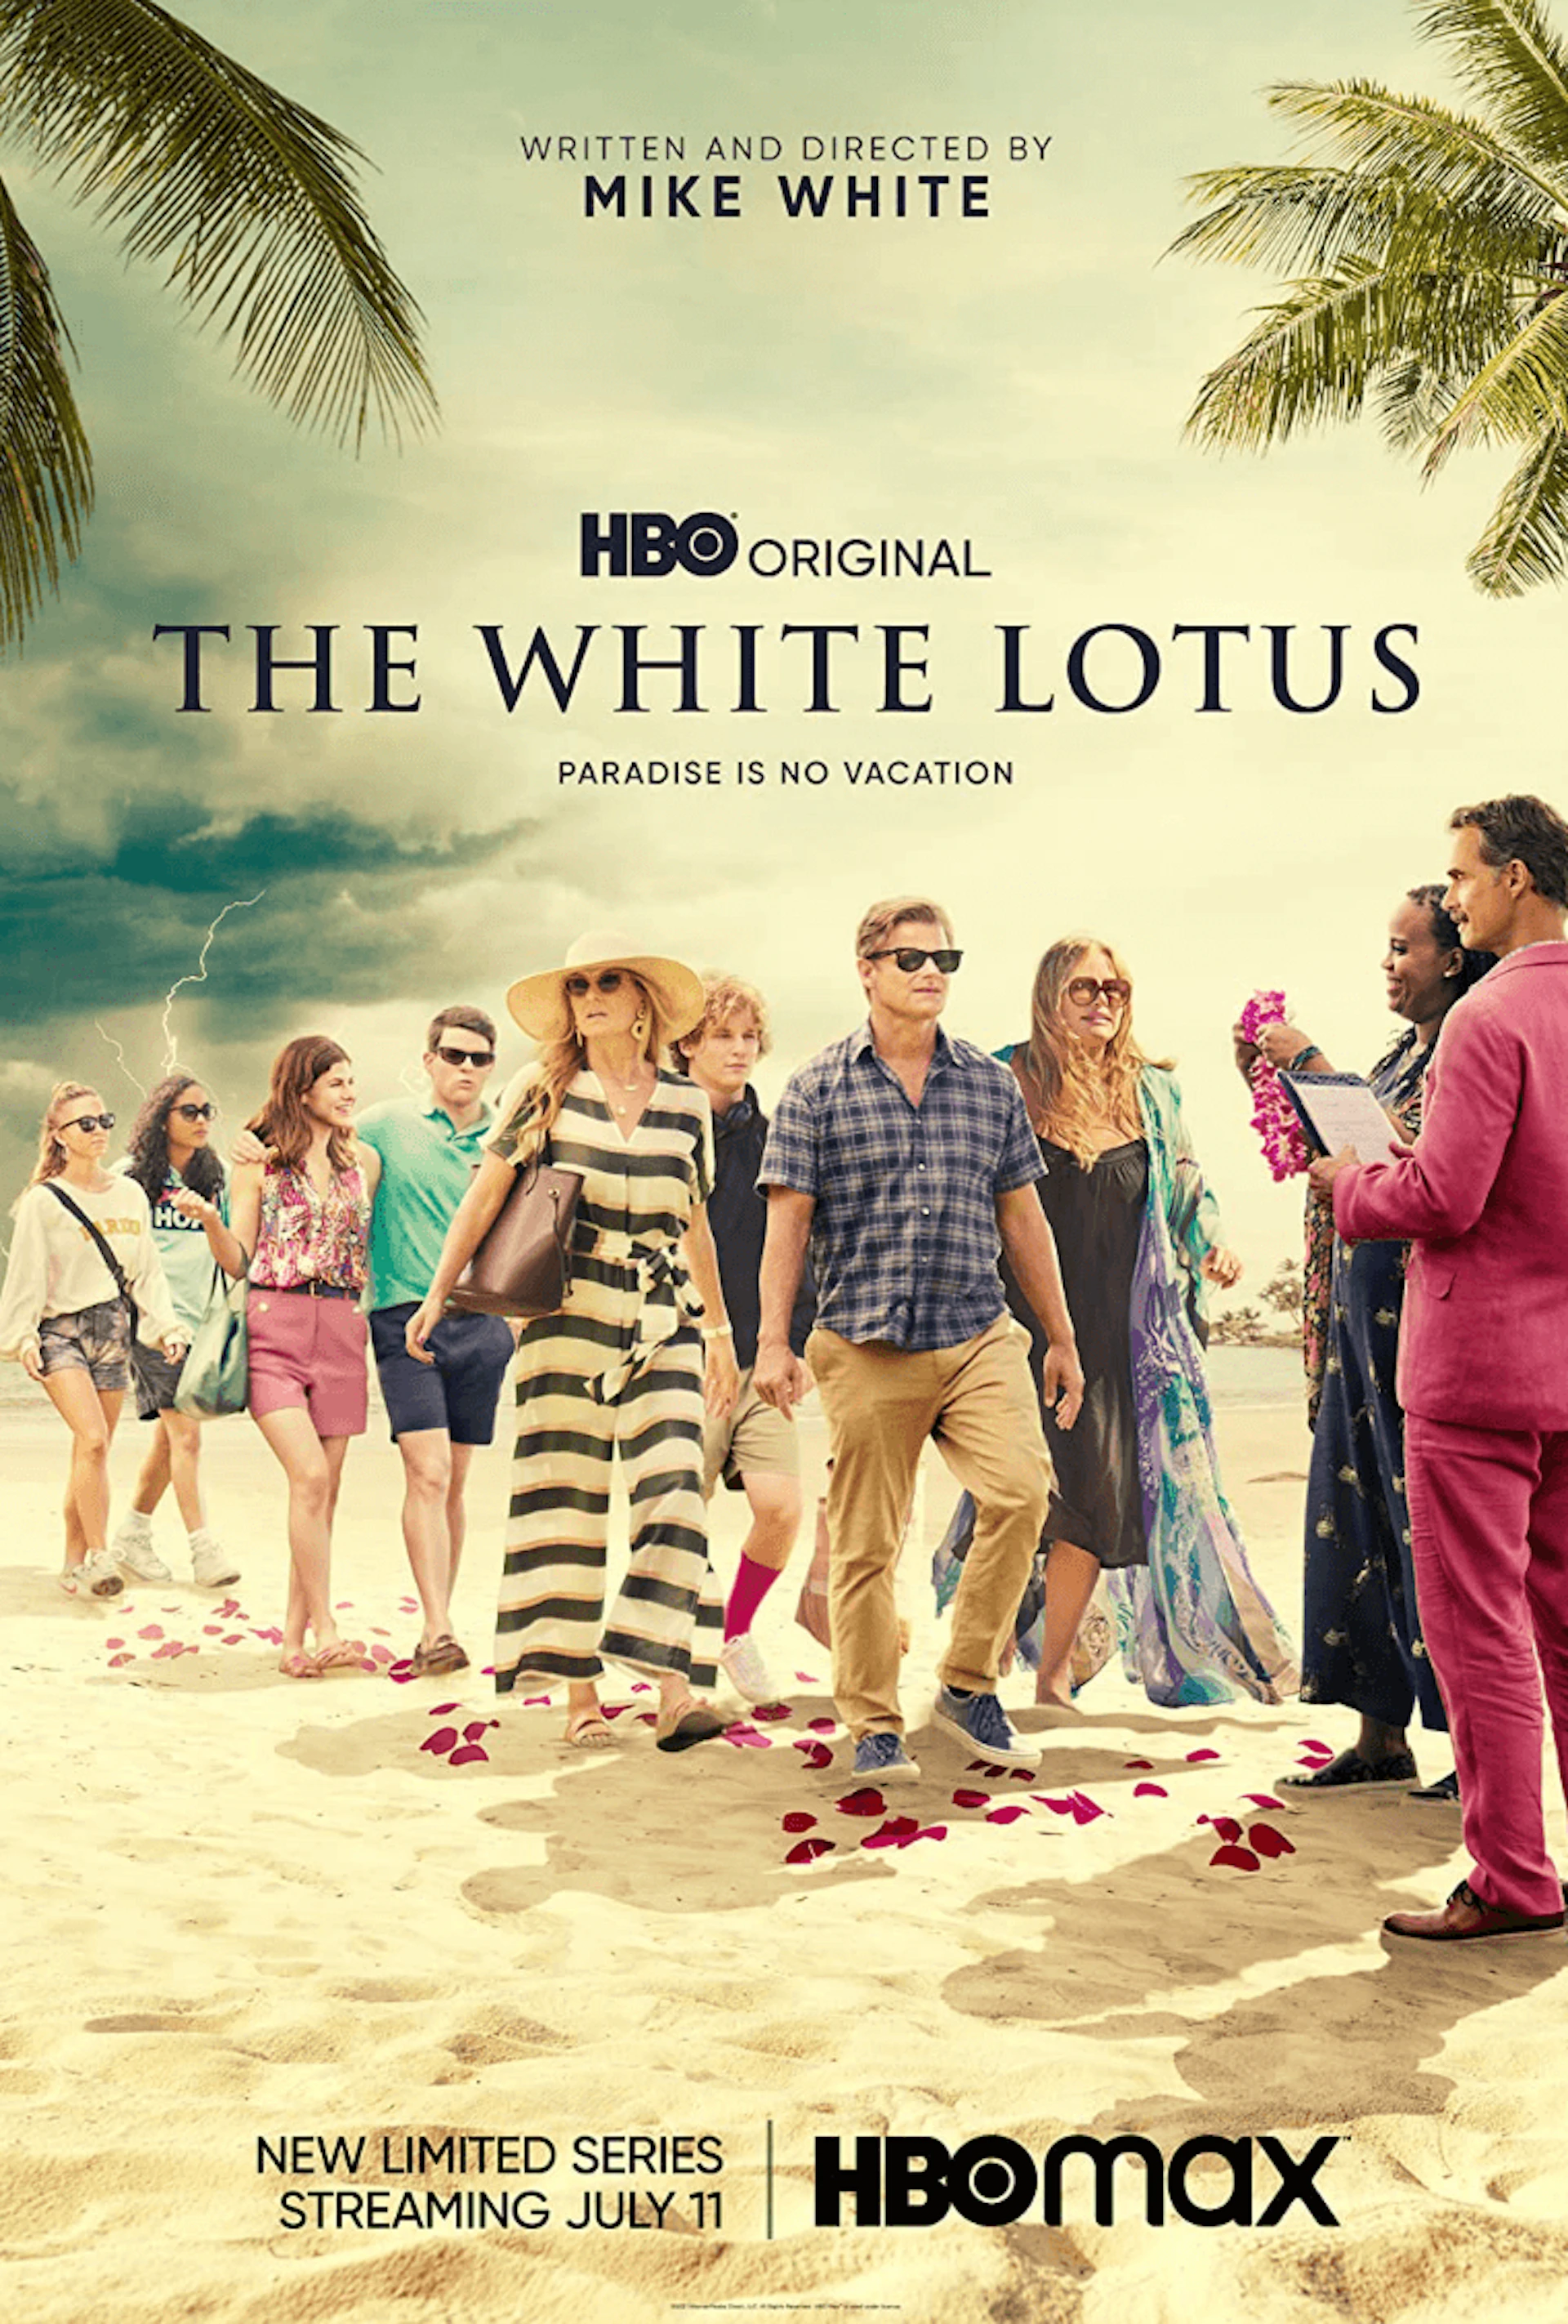 HBO's The White Lotus - International versioning and dubbing